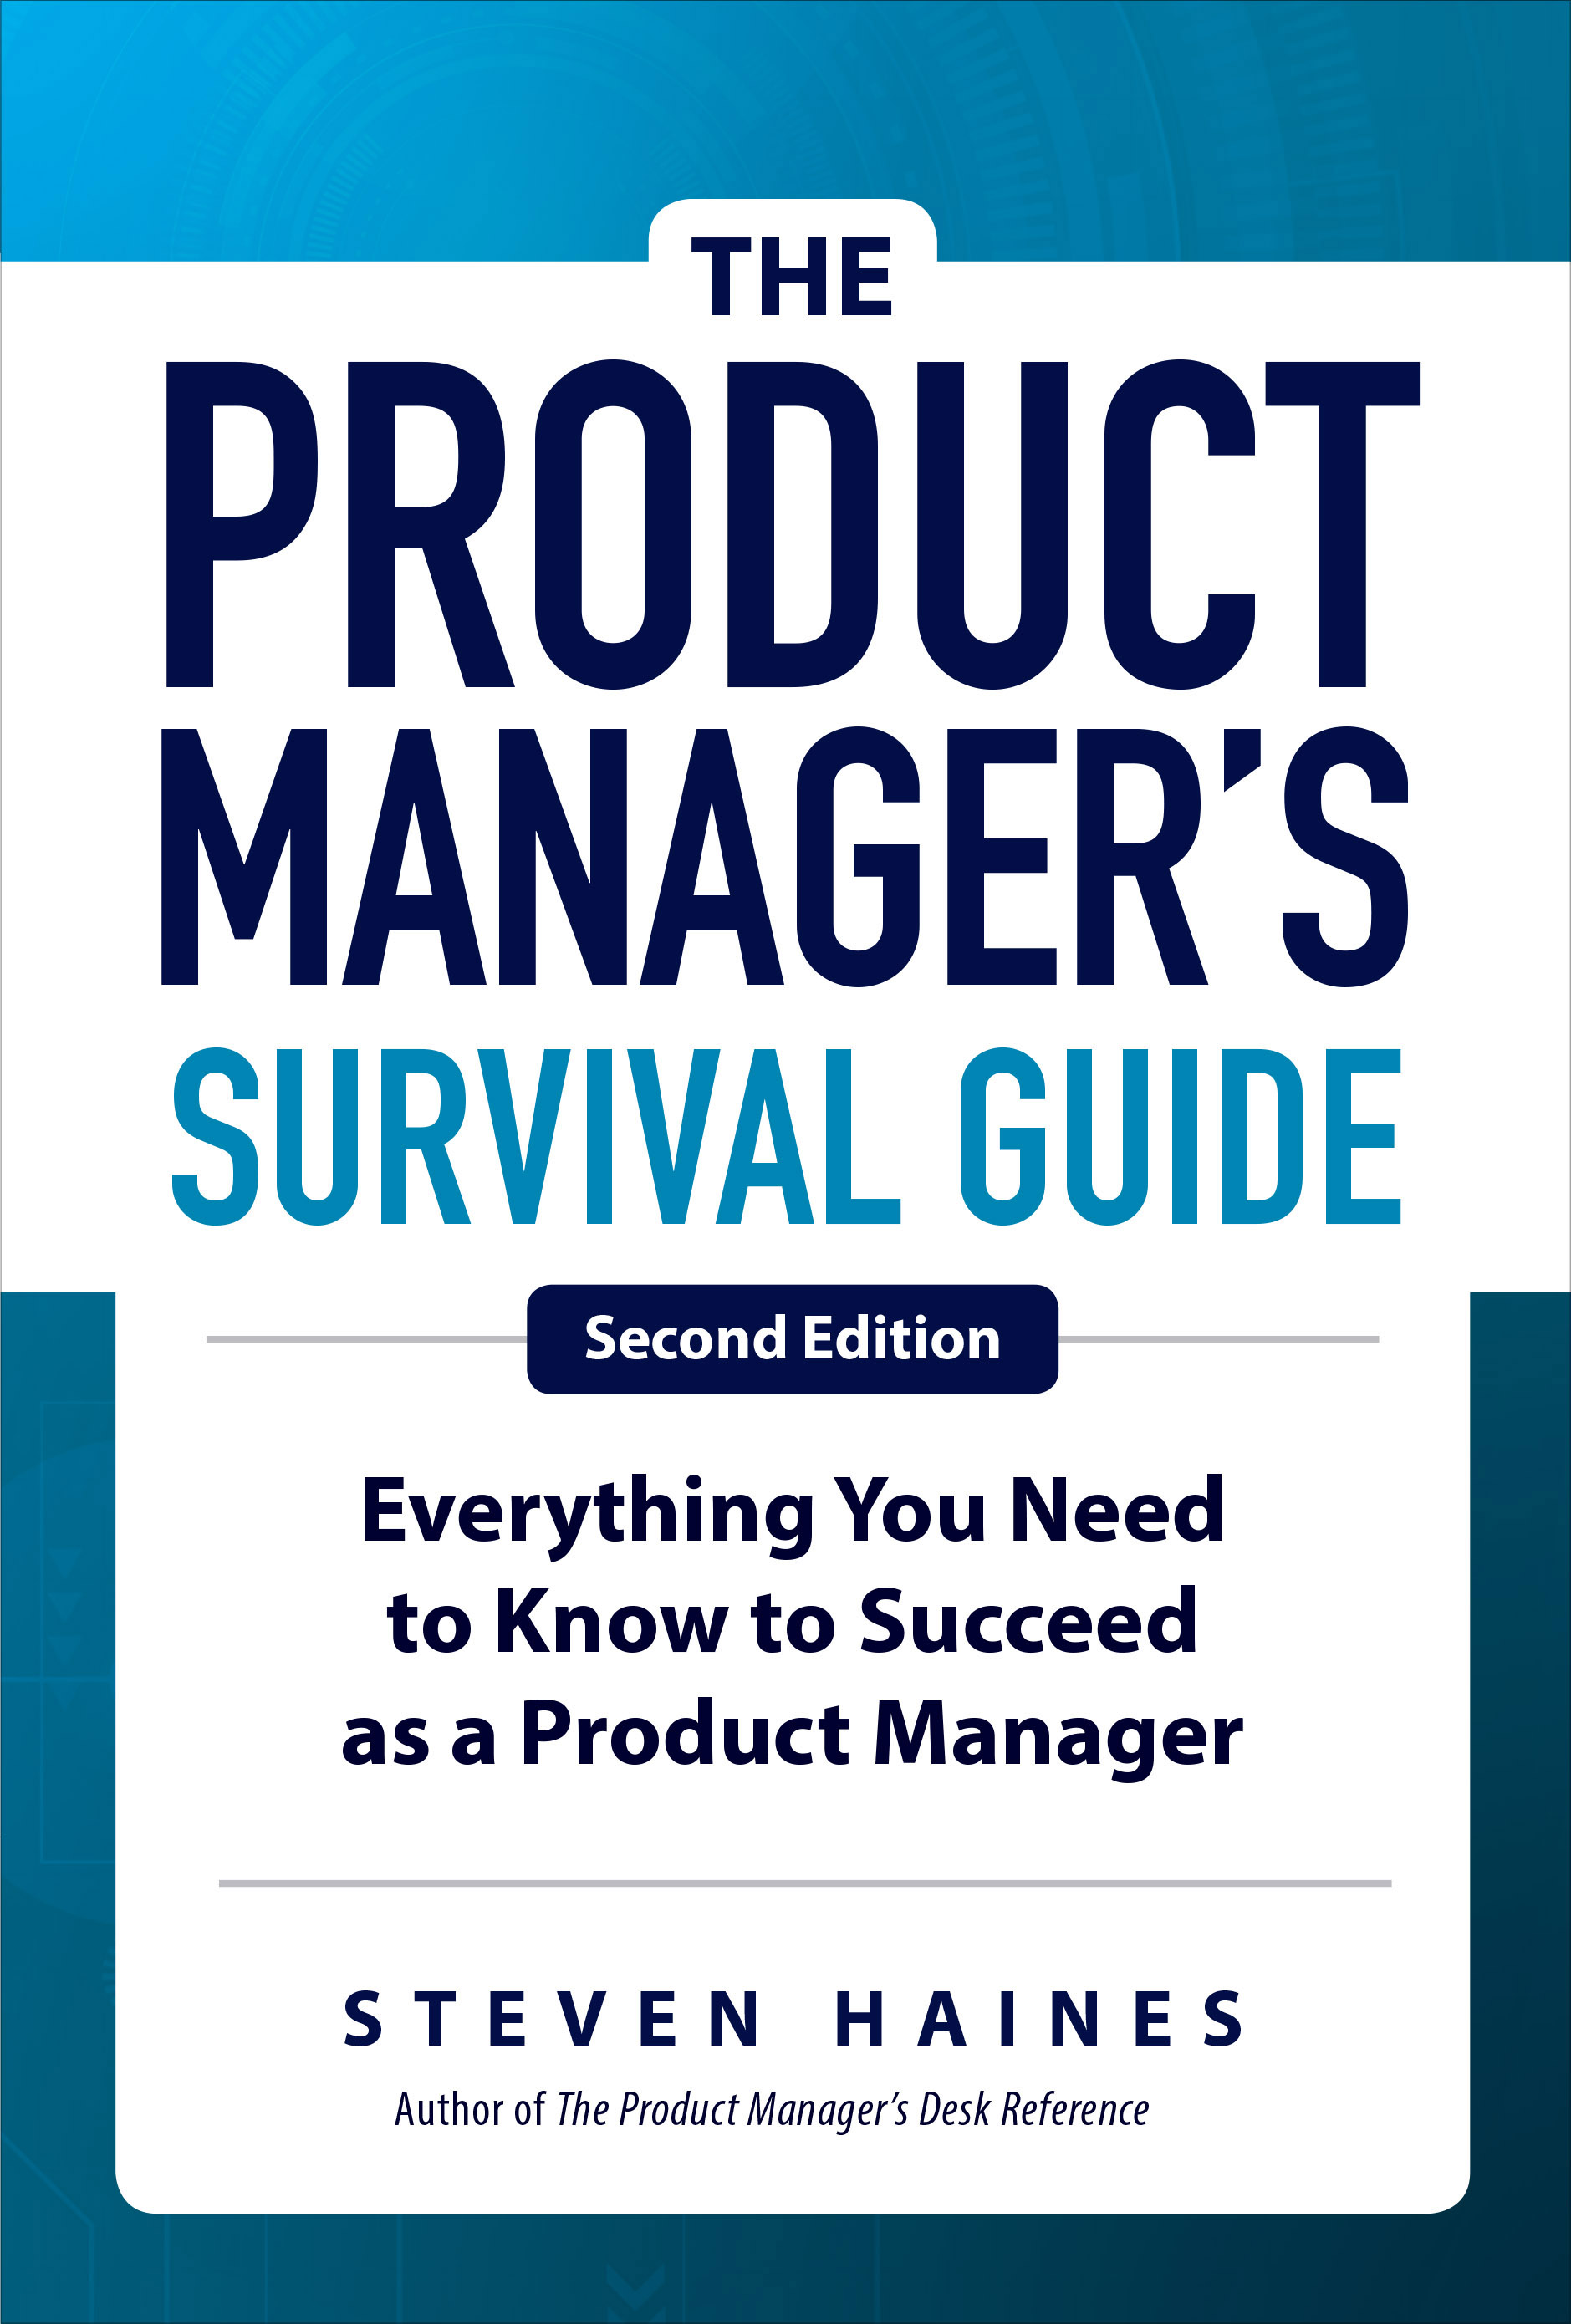 The Product Manager's Survival Guide, Second Edition